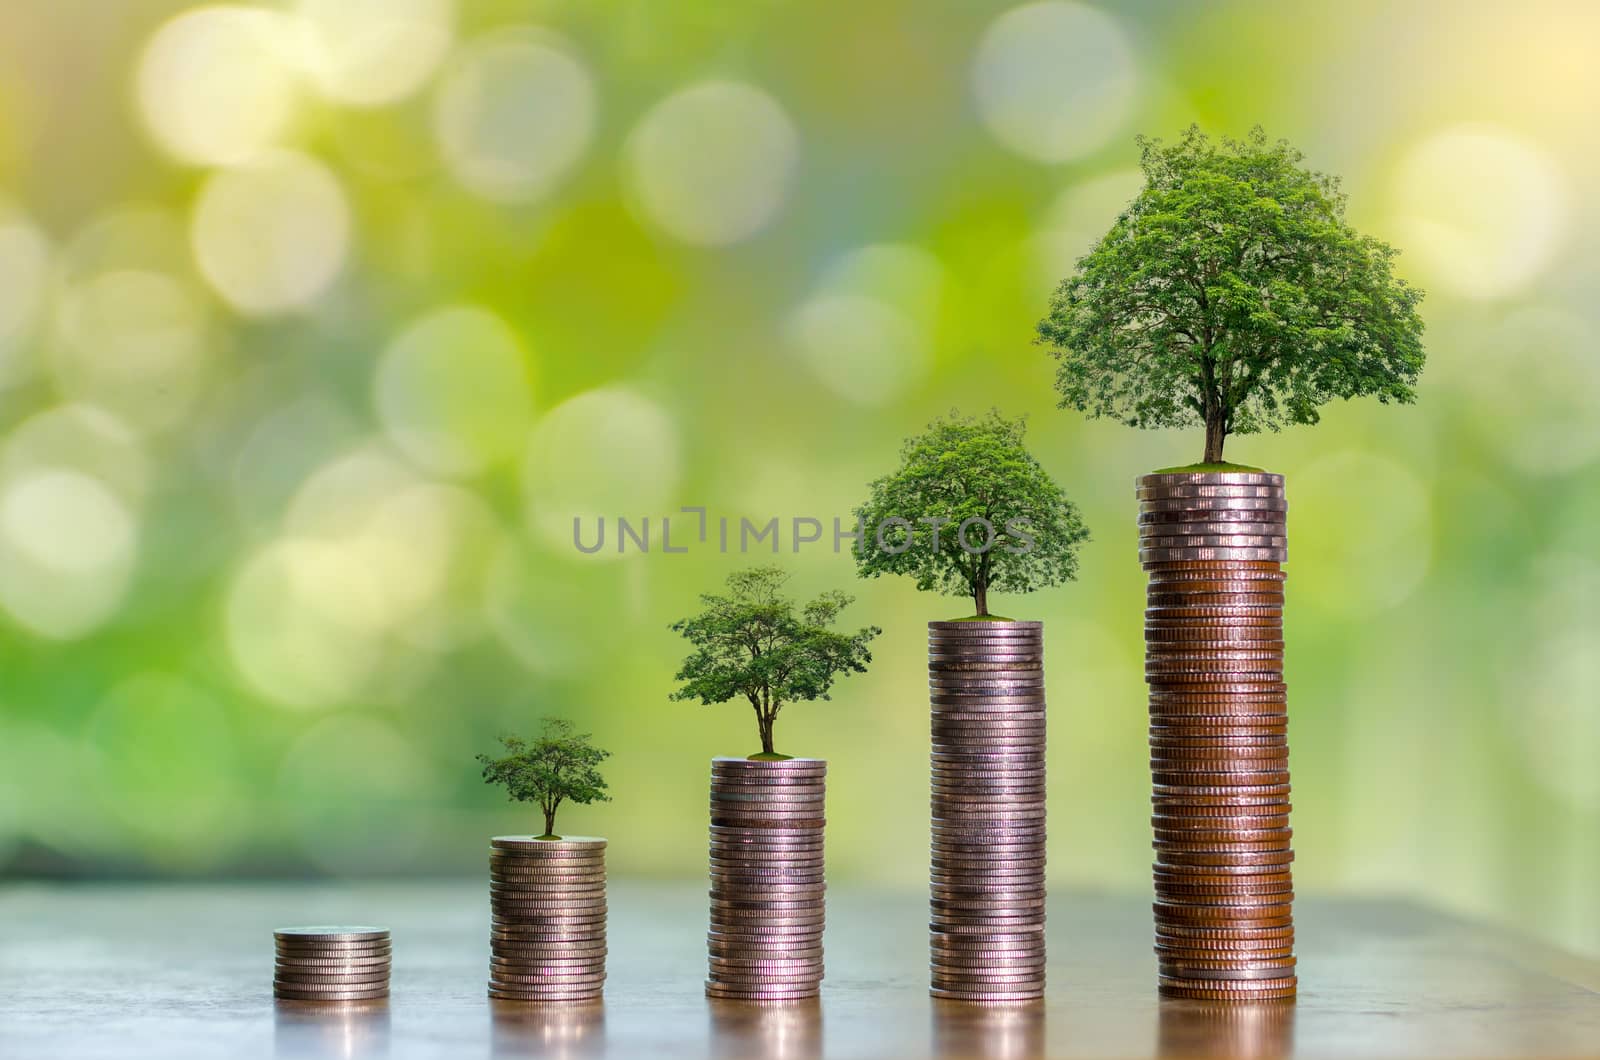 Money growth Saving money. Upper tree coins to shown concept of growing business by sarayut_thaneerat